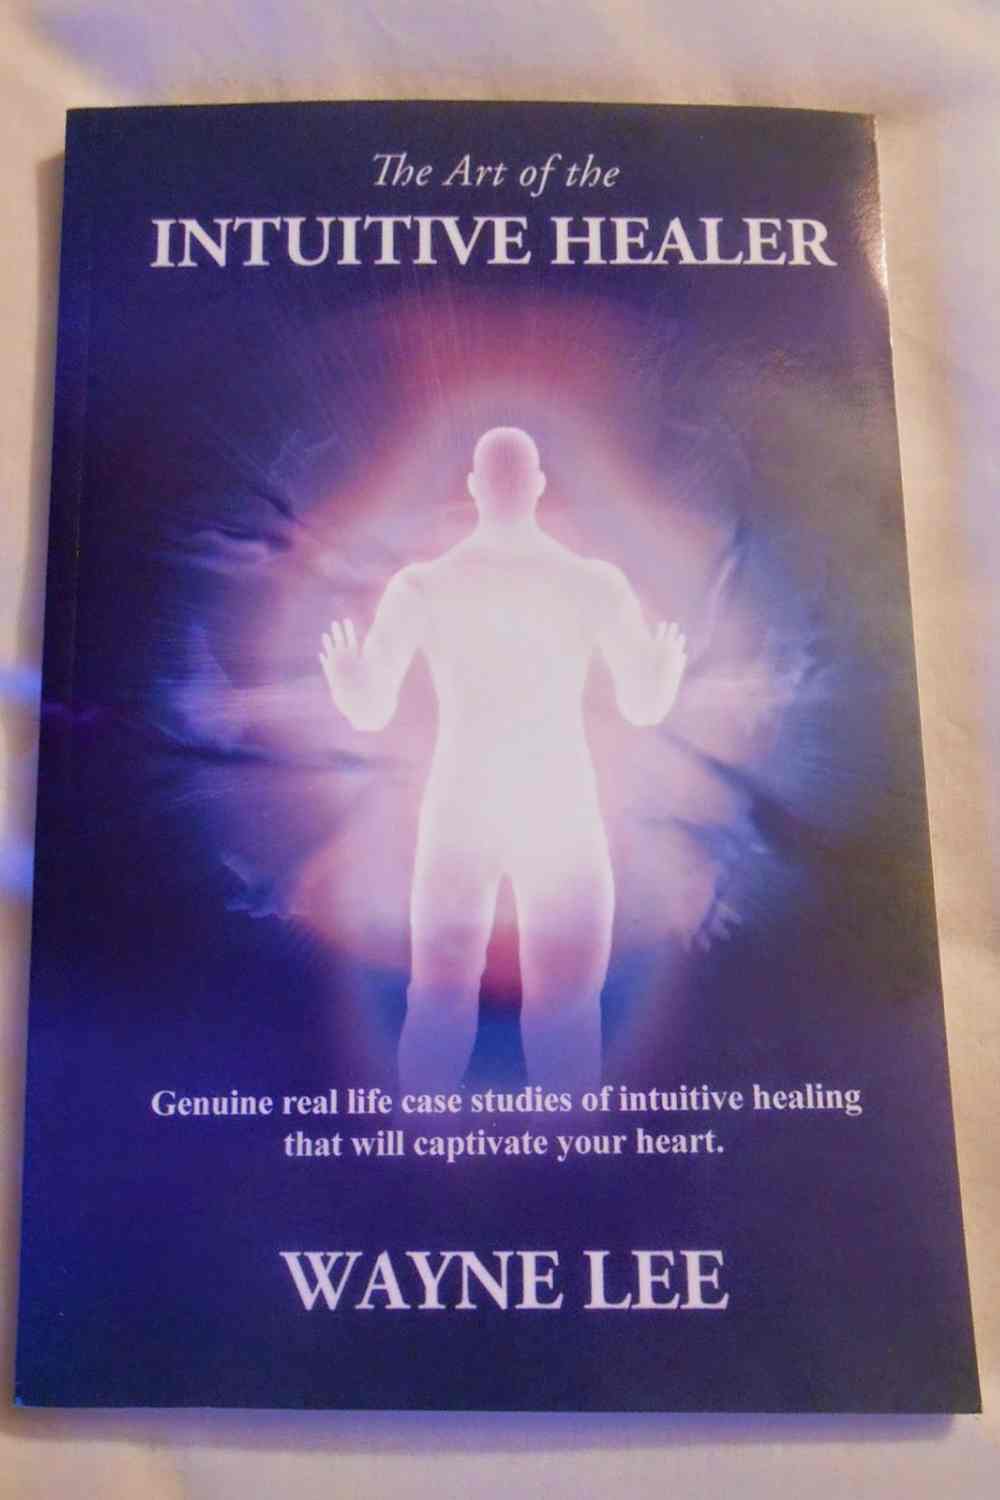 Review: The Art of the Intuitive Healer – Wayne Lee